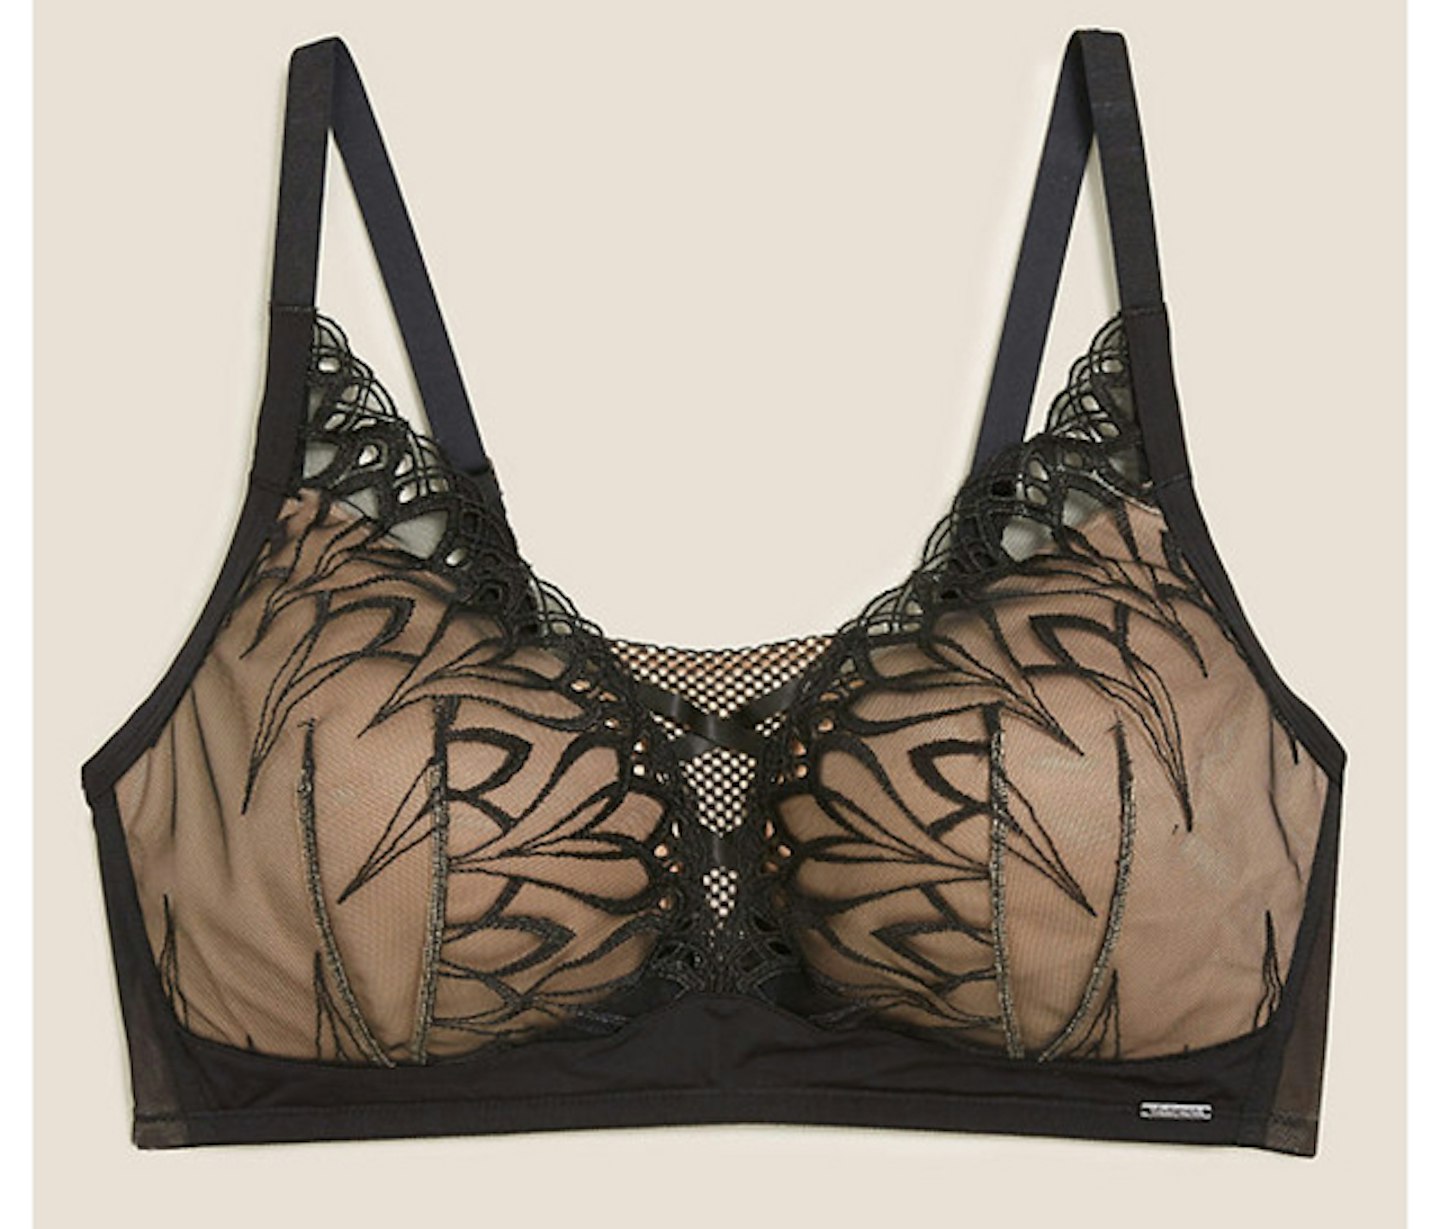 Buy Post Surgery Non Wired Lace Bras 2 Pack from Next